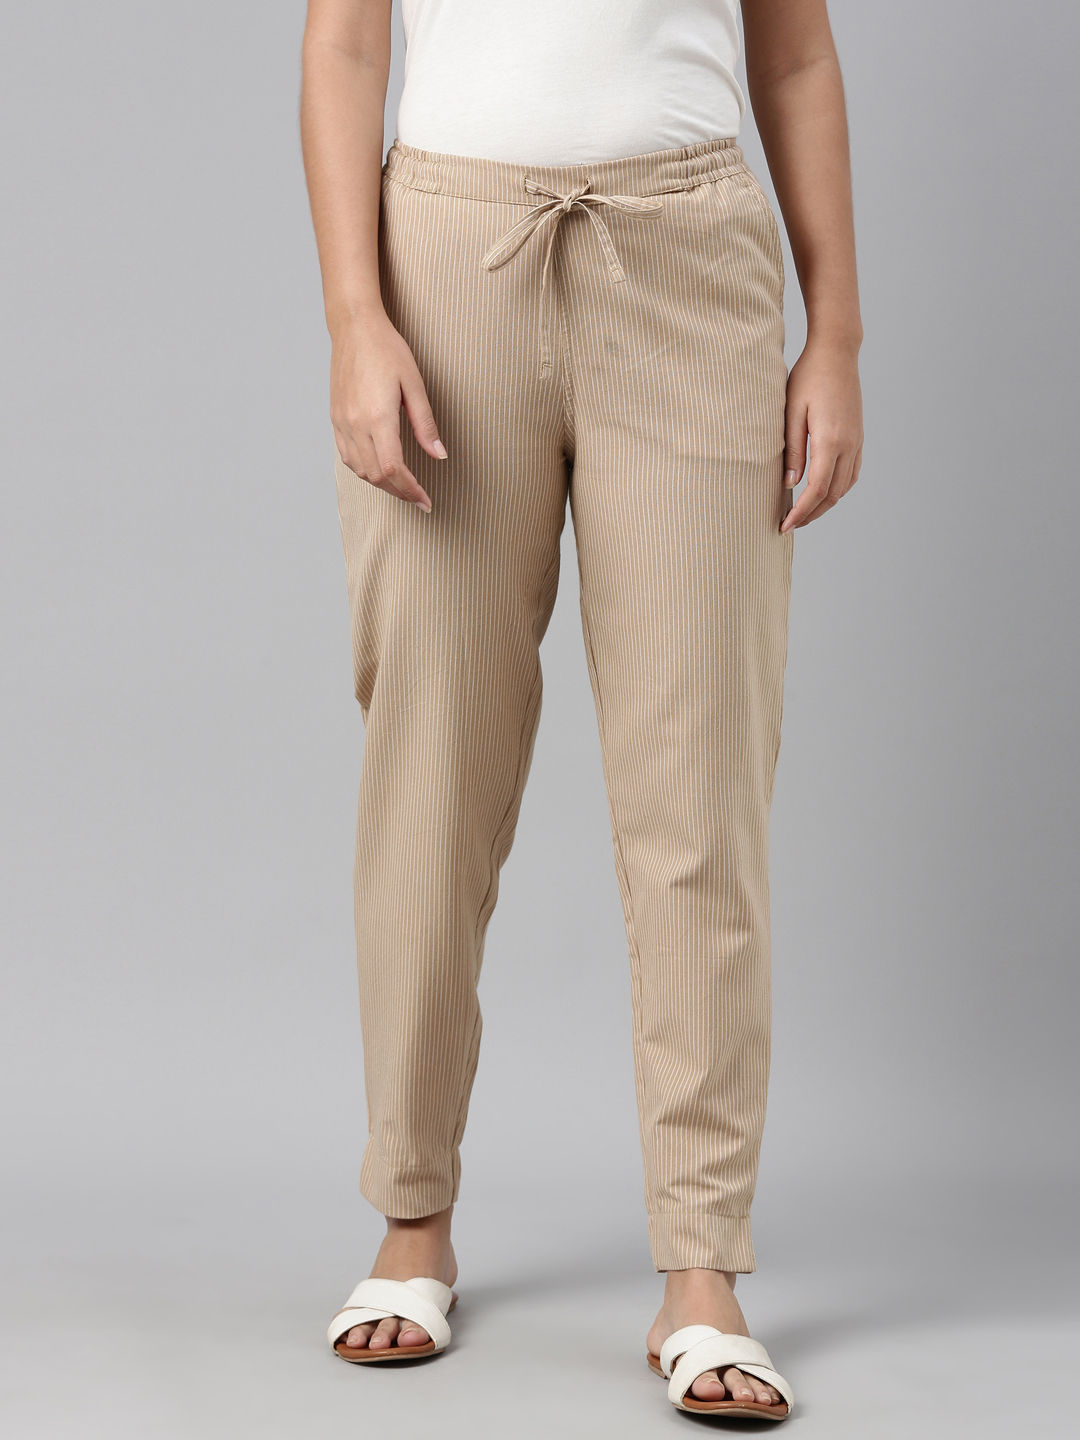 Go Colors Ethnic Bottoms : Go Colors Dark Red Pencil Pants Linen Blend  Online | Nykaa Fashion